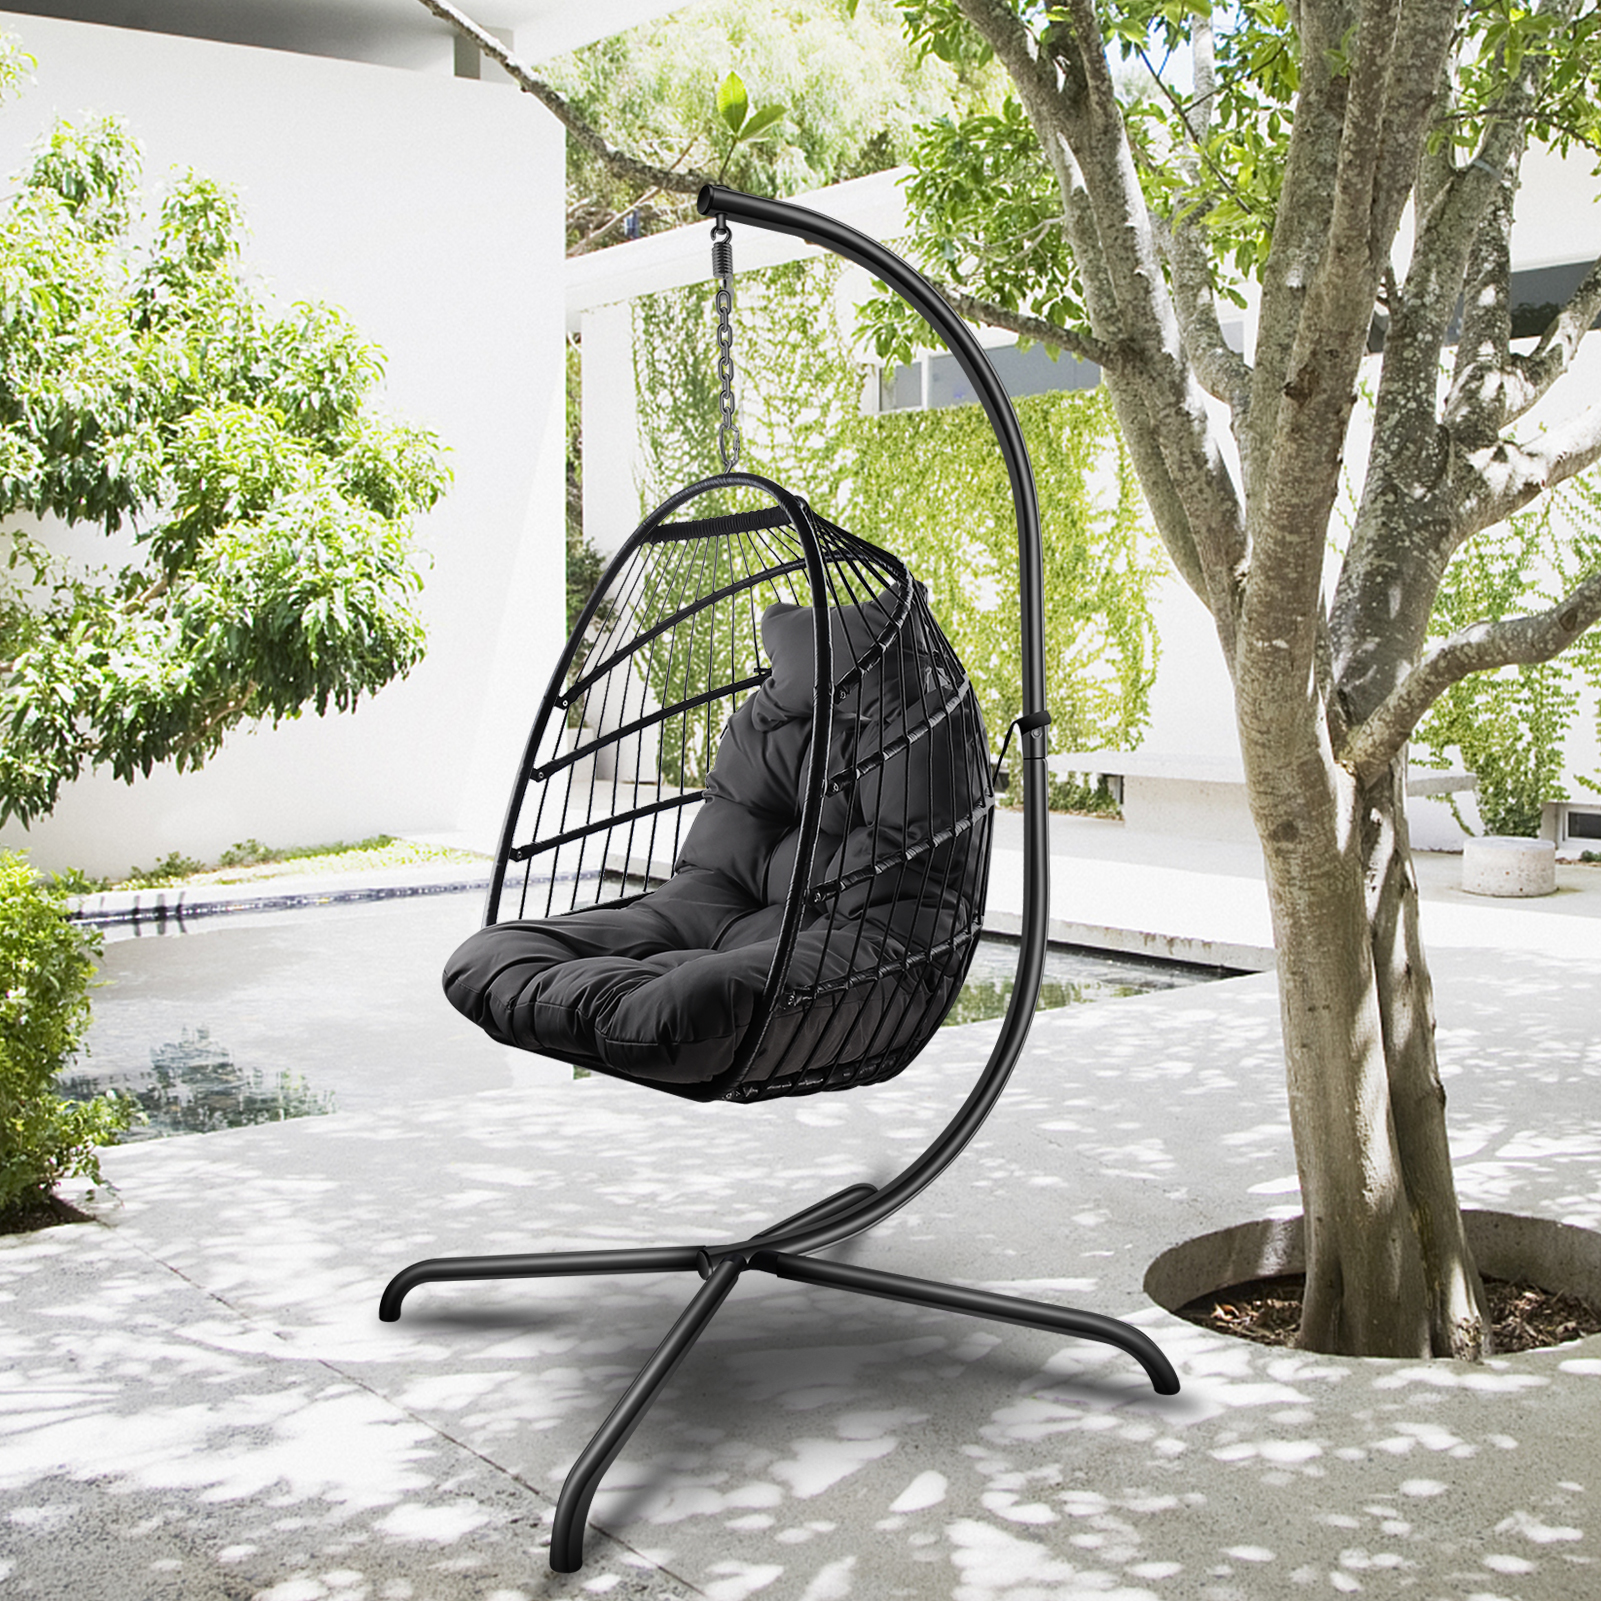 Swing Egg Chair with Stand Indoor Outdoor Wicker Rattan Patio Basket Hanging Chair with C Type bracket , with cushion and pillow,Patio Wicker folding Hanging Chair( Black New arrivals within 10 days)-CASAINC